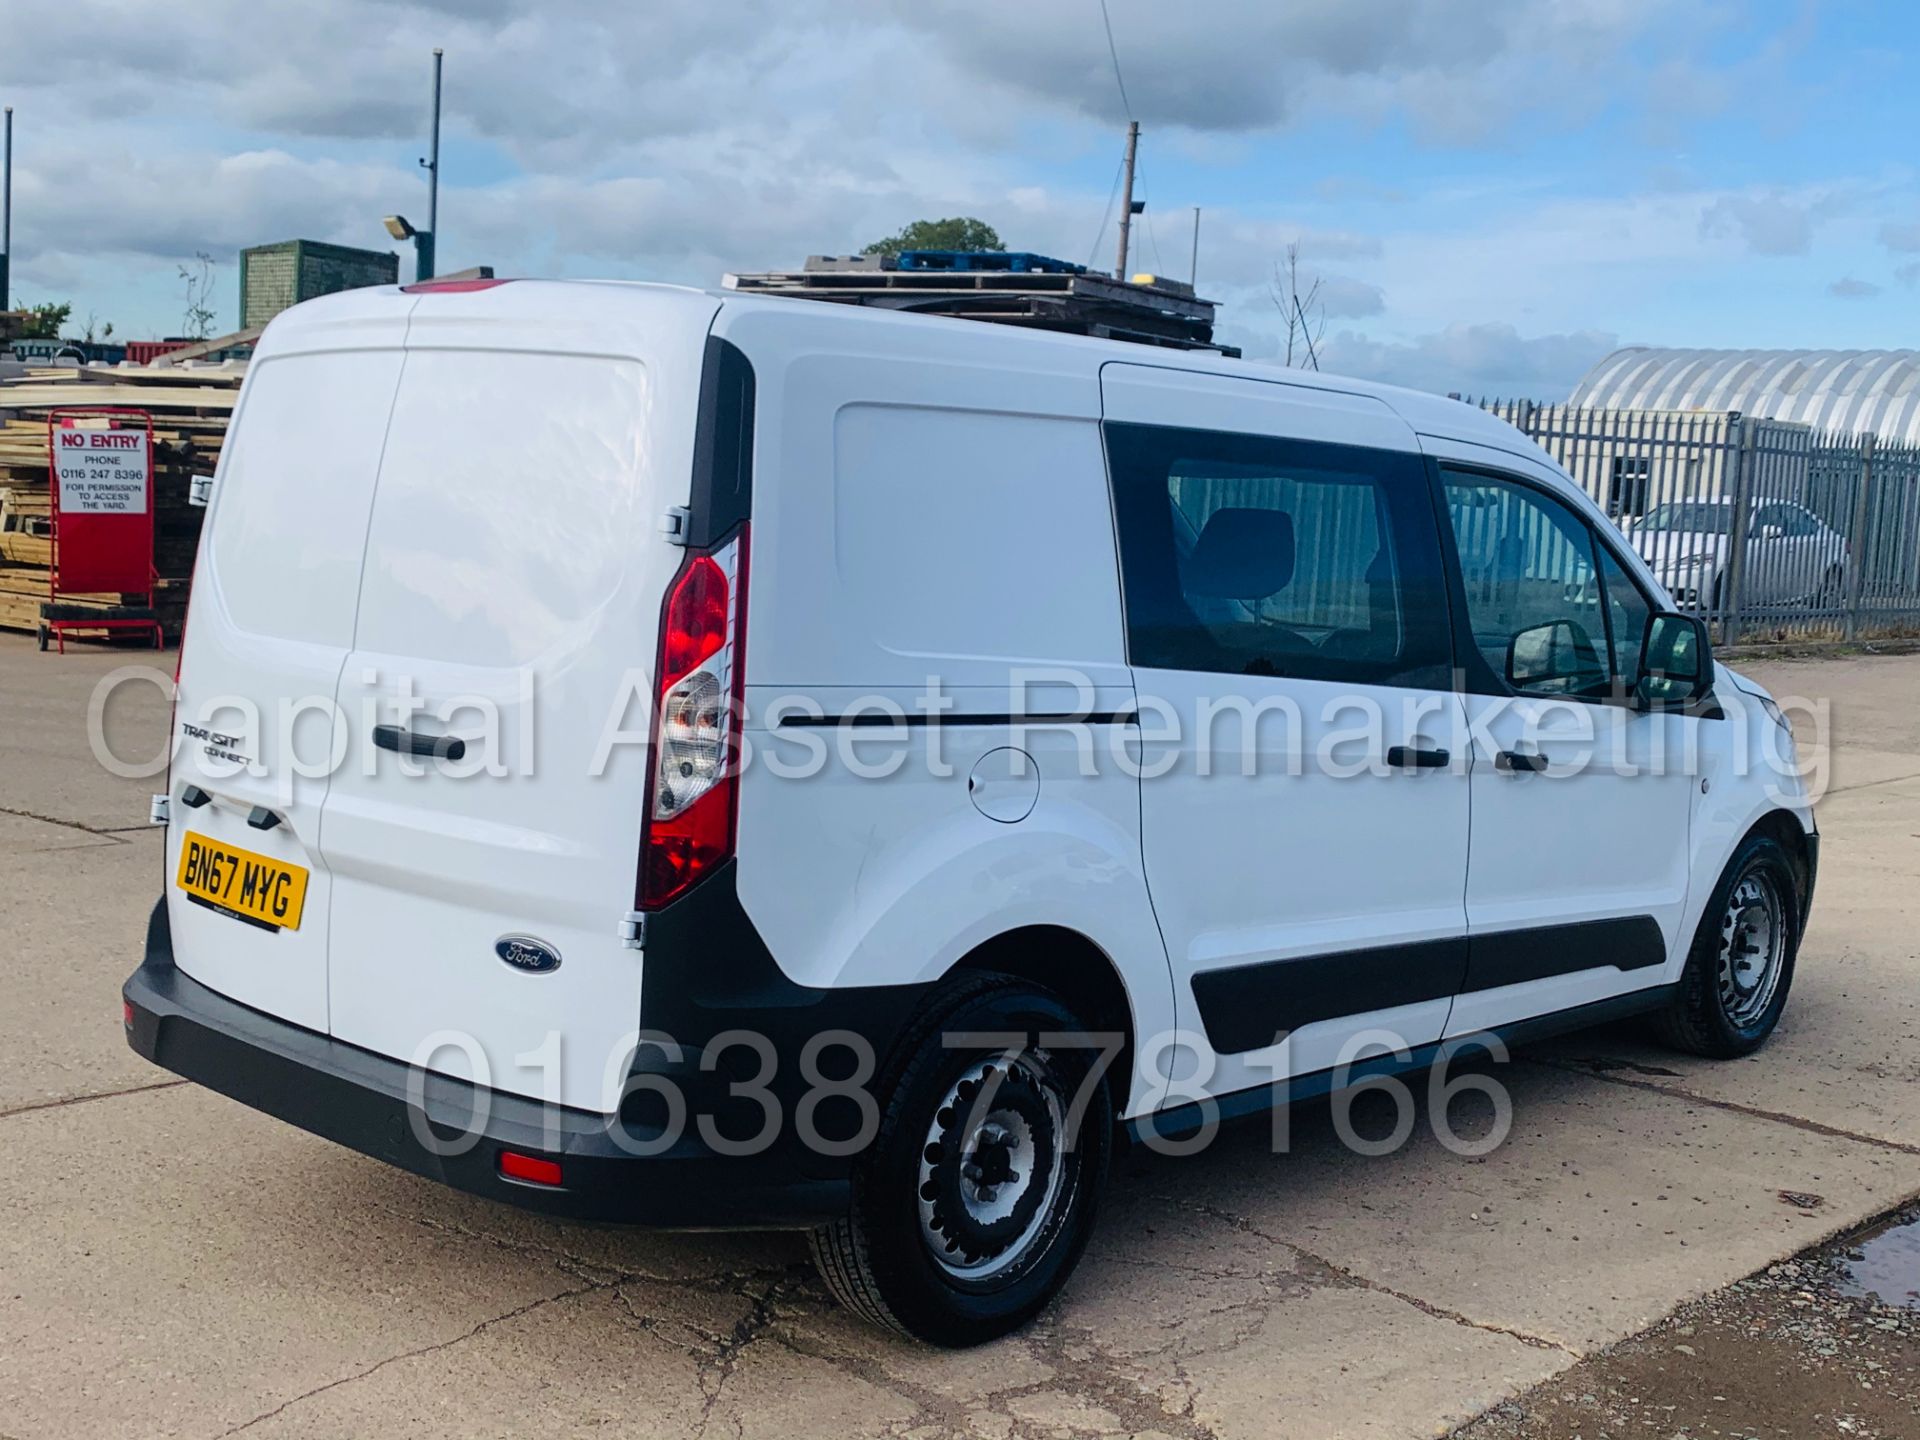 (On Sale) FORD TRANSIT CONNECT *LWB - 5 SEATER CREW VAN* (67 REG - EURO 6) 1.5 TDCI *A/C* (1 OWNER) - Image 12 of 40